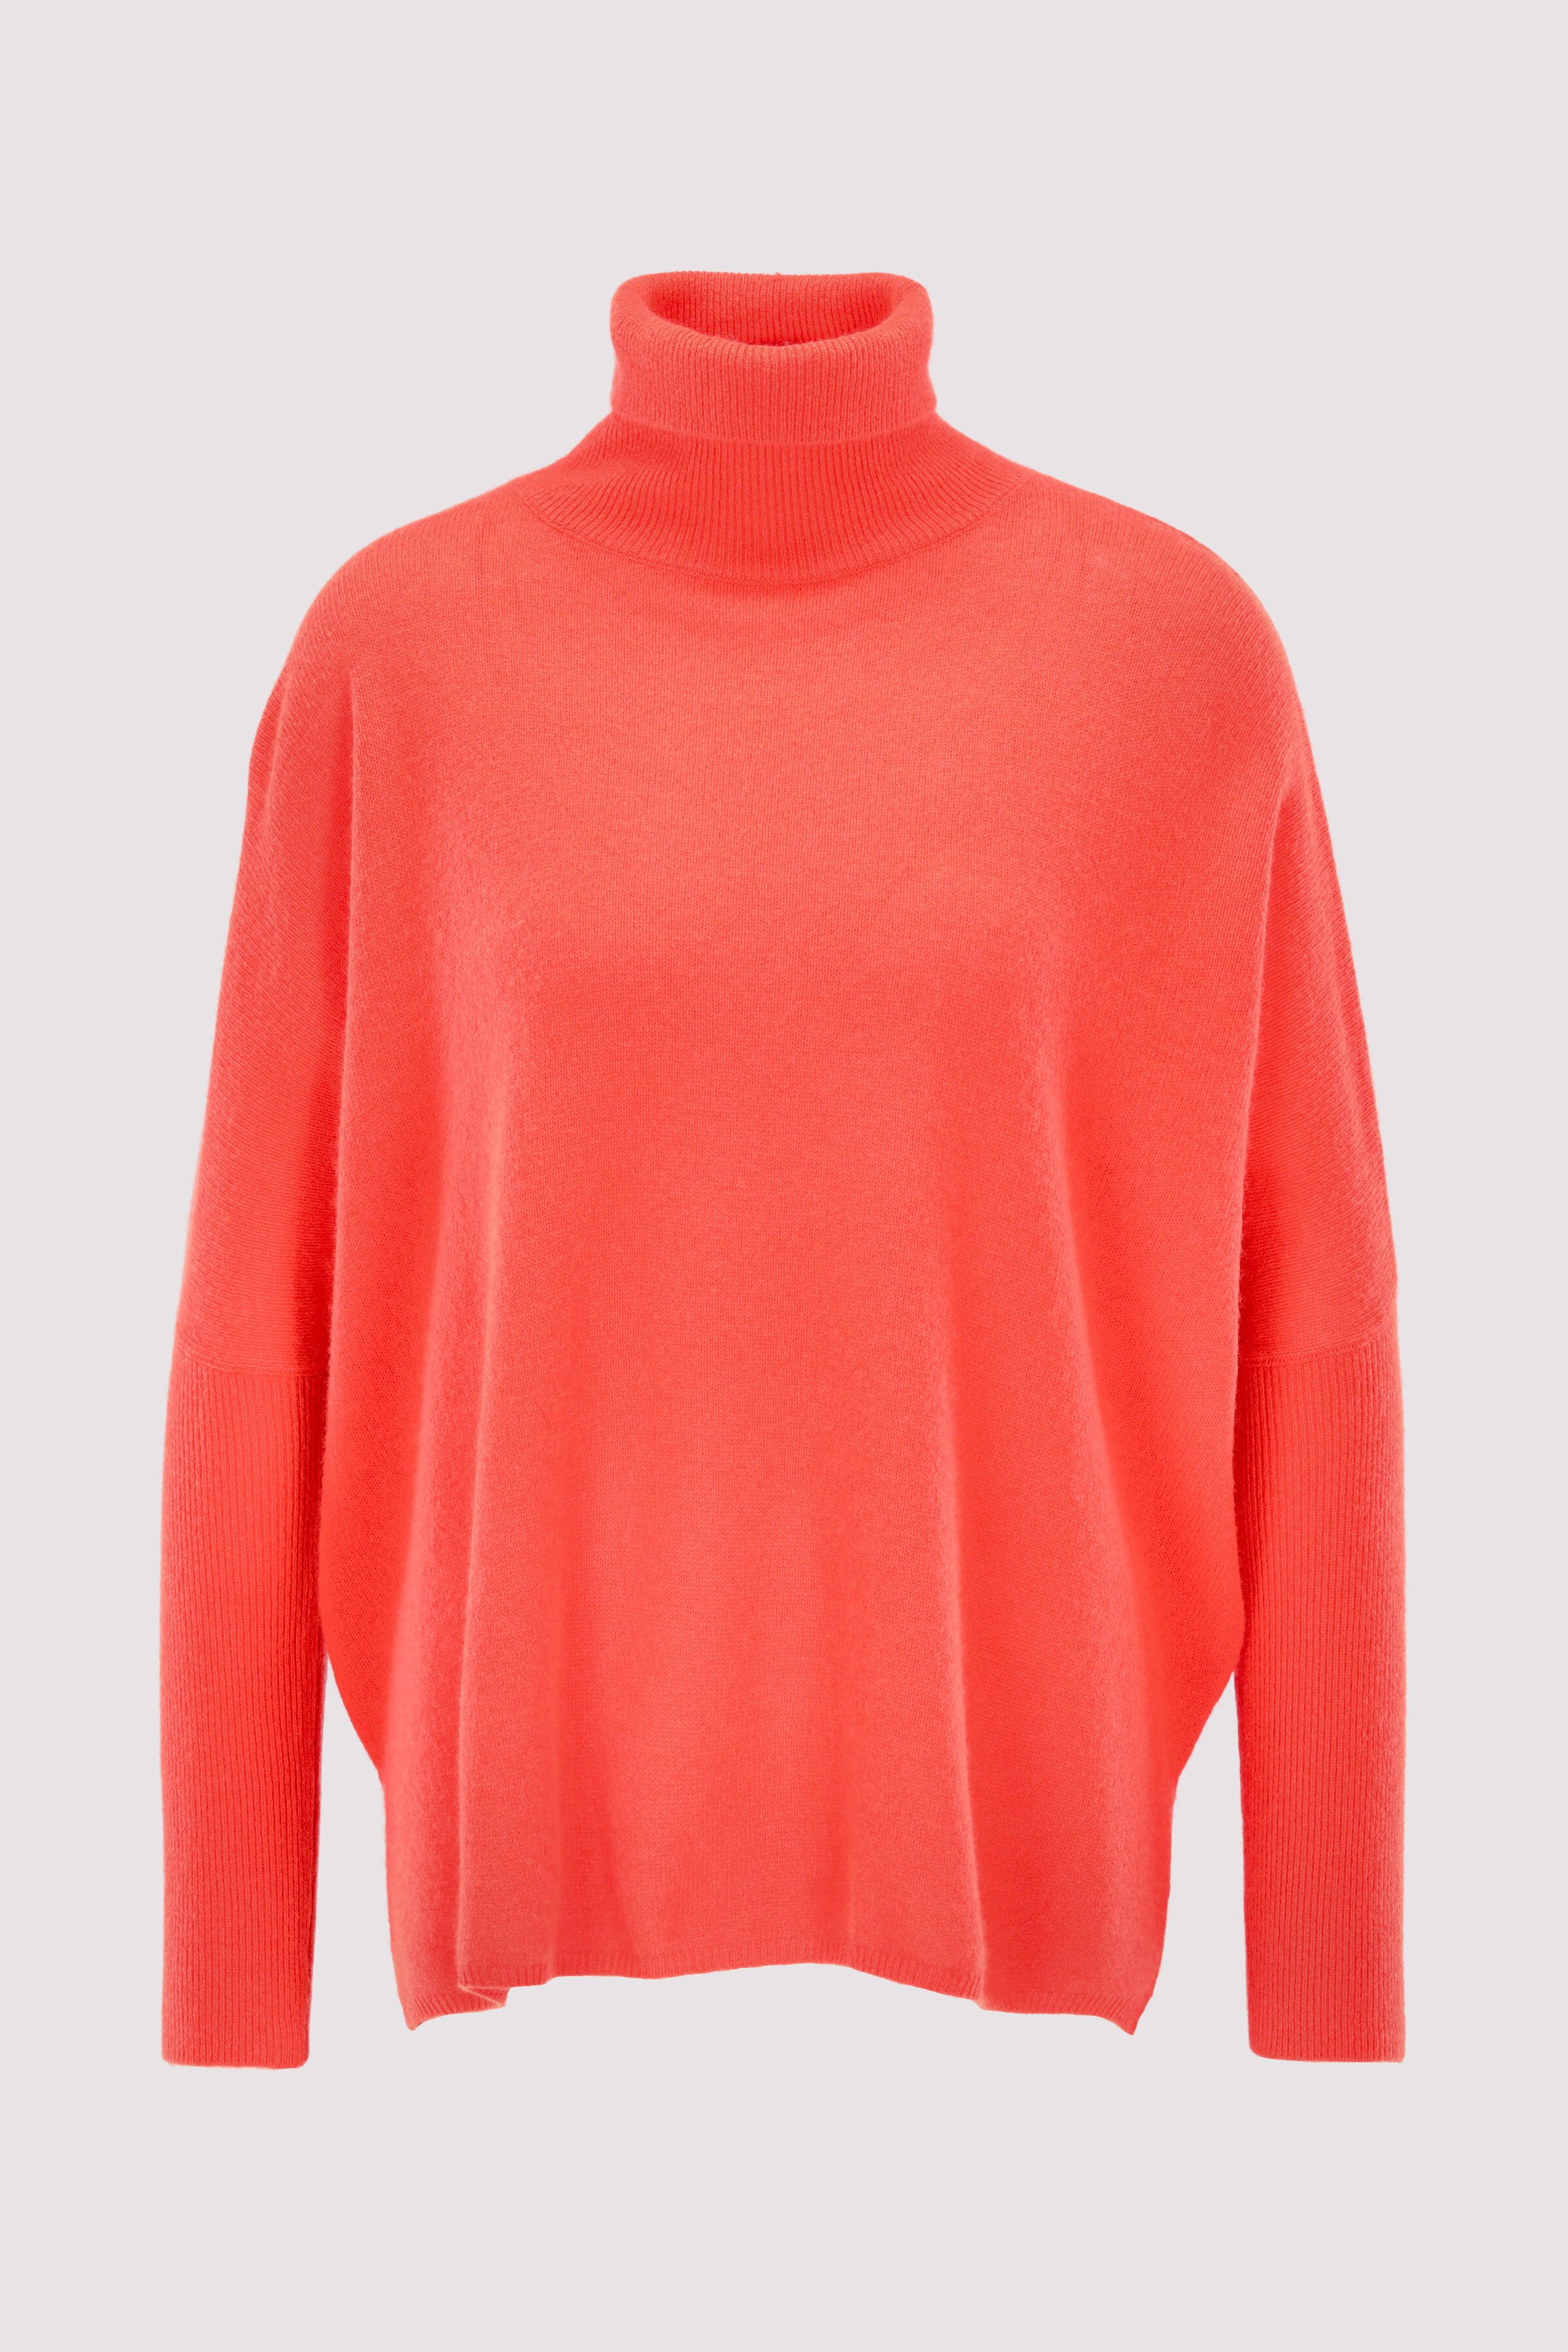 Corail fluo